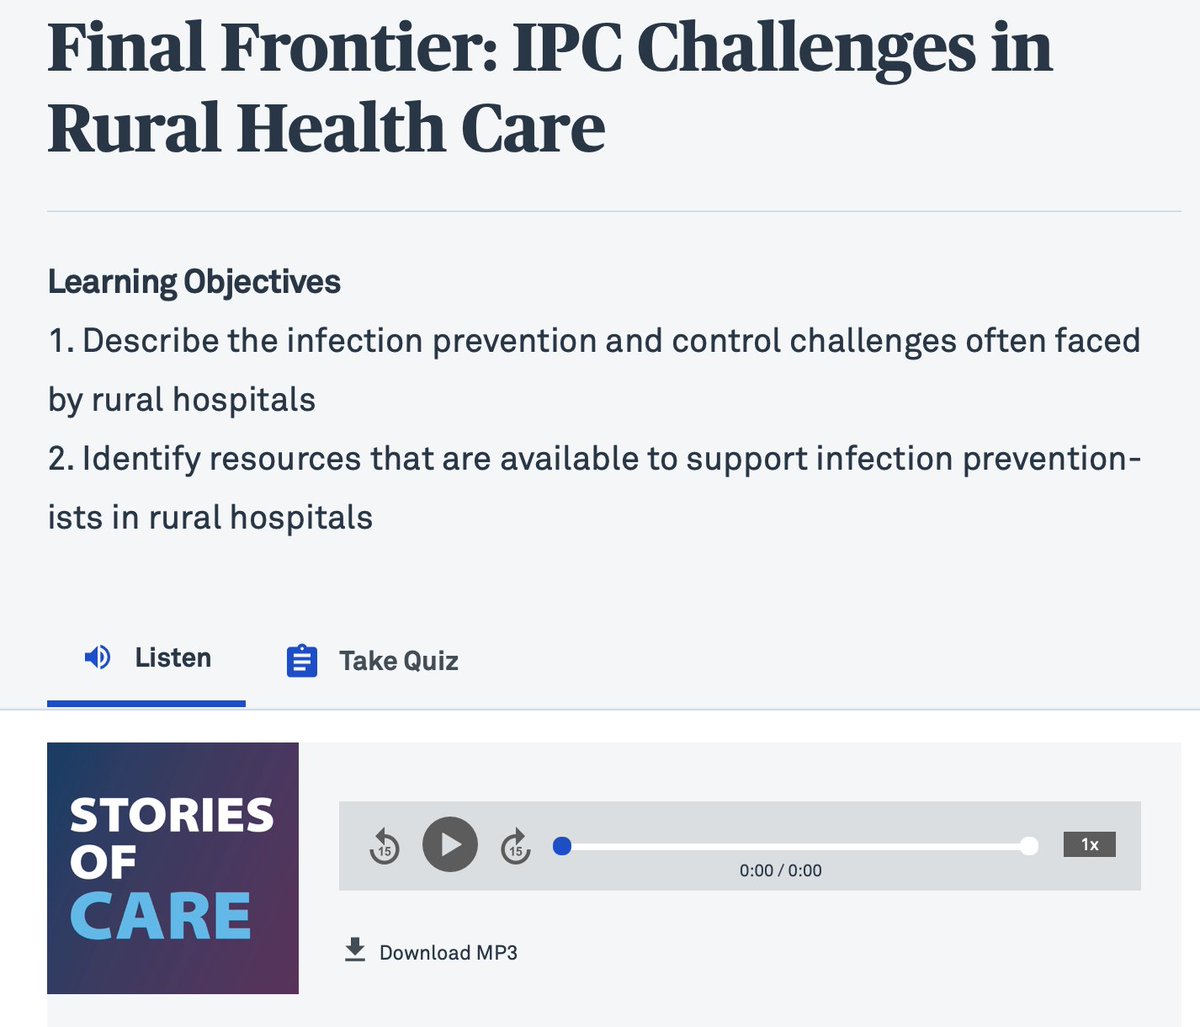 Grateful for the opportunity to highlight the great work being done @WVUMedicine in this @CDC_Firstline @AmerMedicalAssn podcast on #InfectionPrevention in rural healthcare settings: edhub.ama-assn.org/cdc-project-fi… @YourlocalIDdoc @APIC @CDCgov